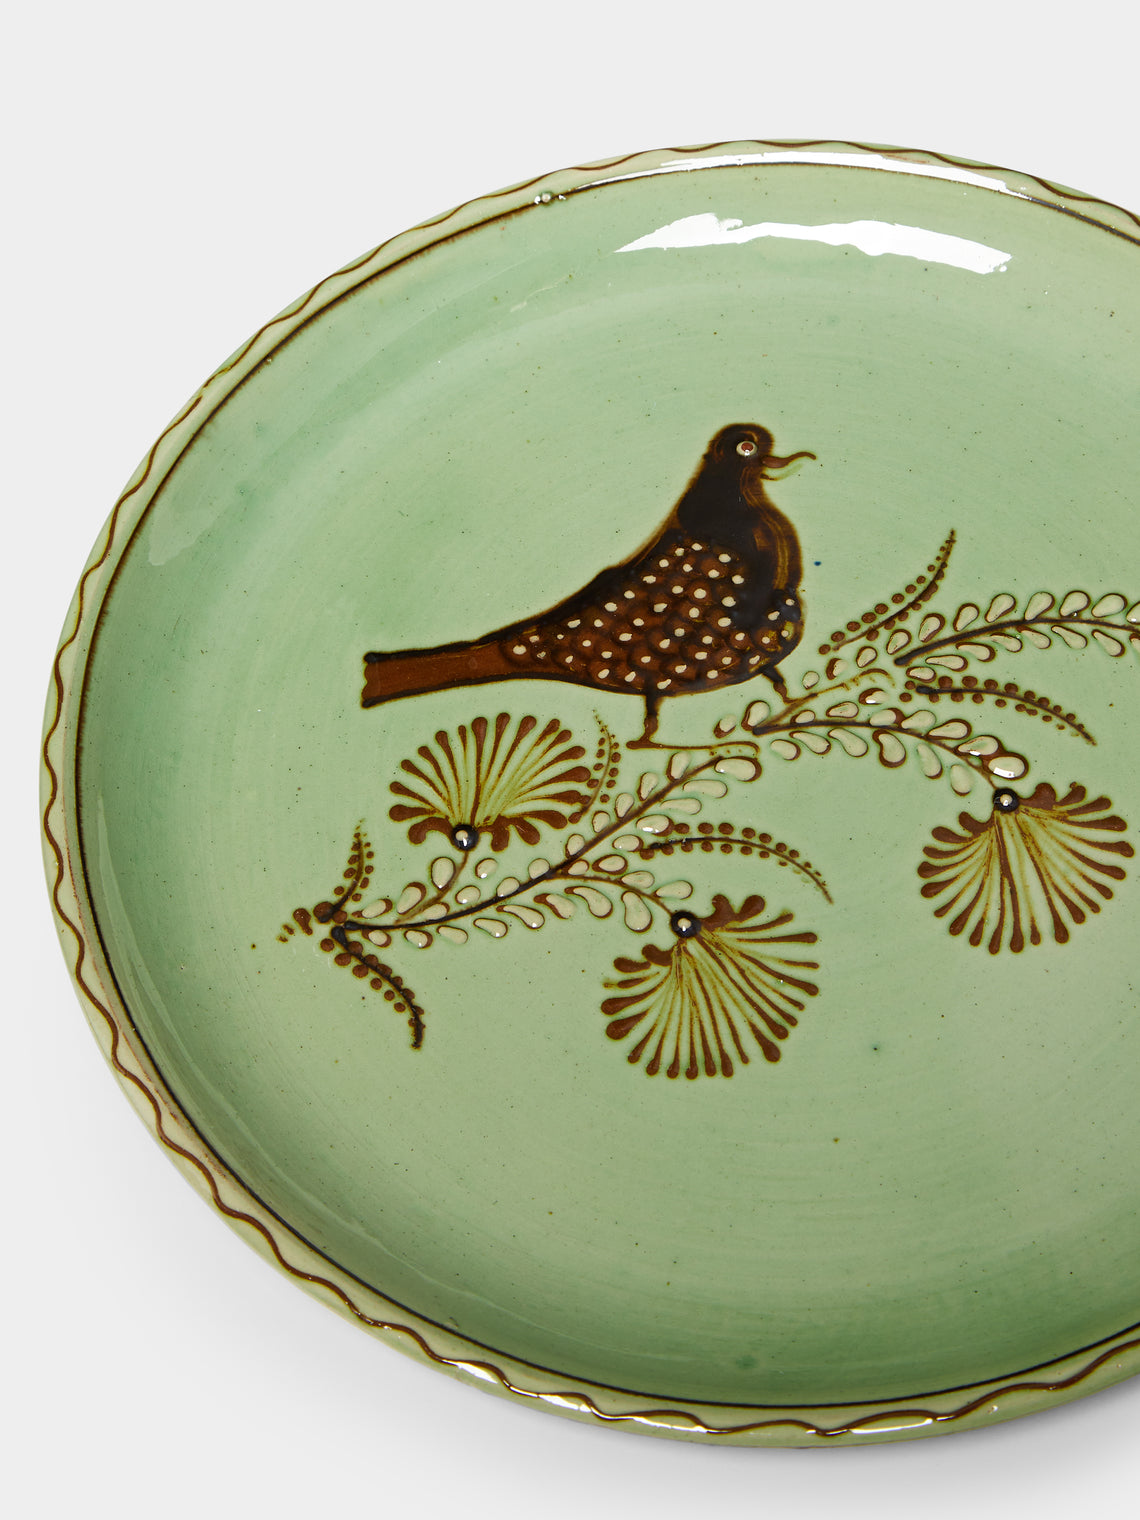 Poterie d’Évires - Birds and Fruits Hand-Painted Ceramic Dinner Plates (Set of 4) -  - ABASK